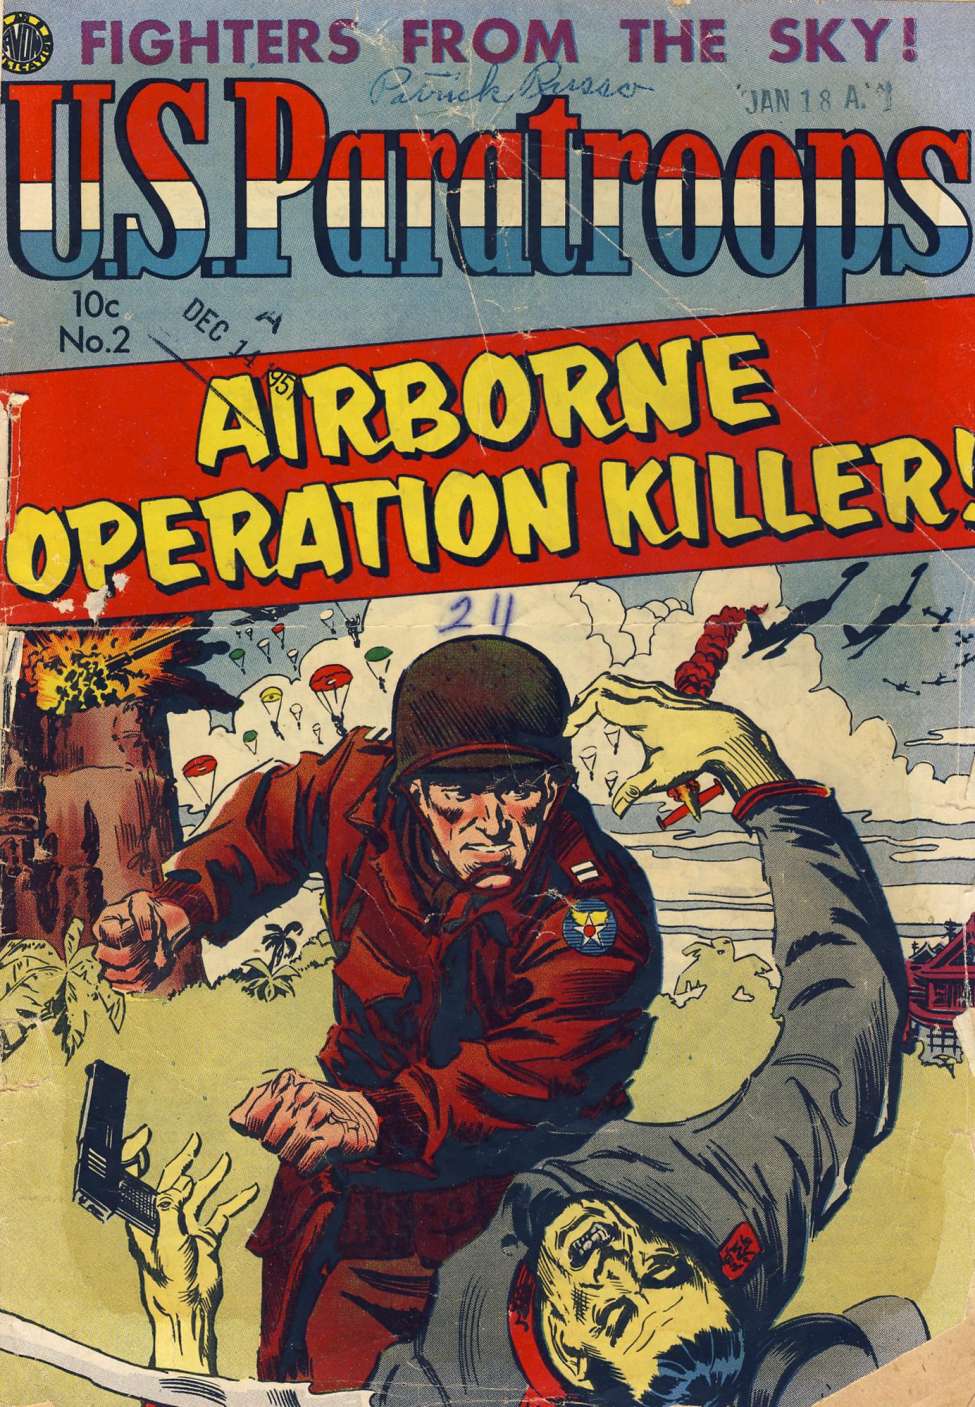 Comic Book Cover For U.S. Paratroops 2